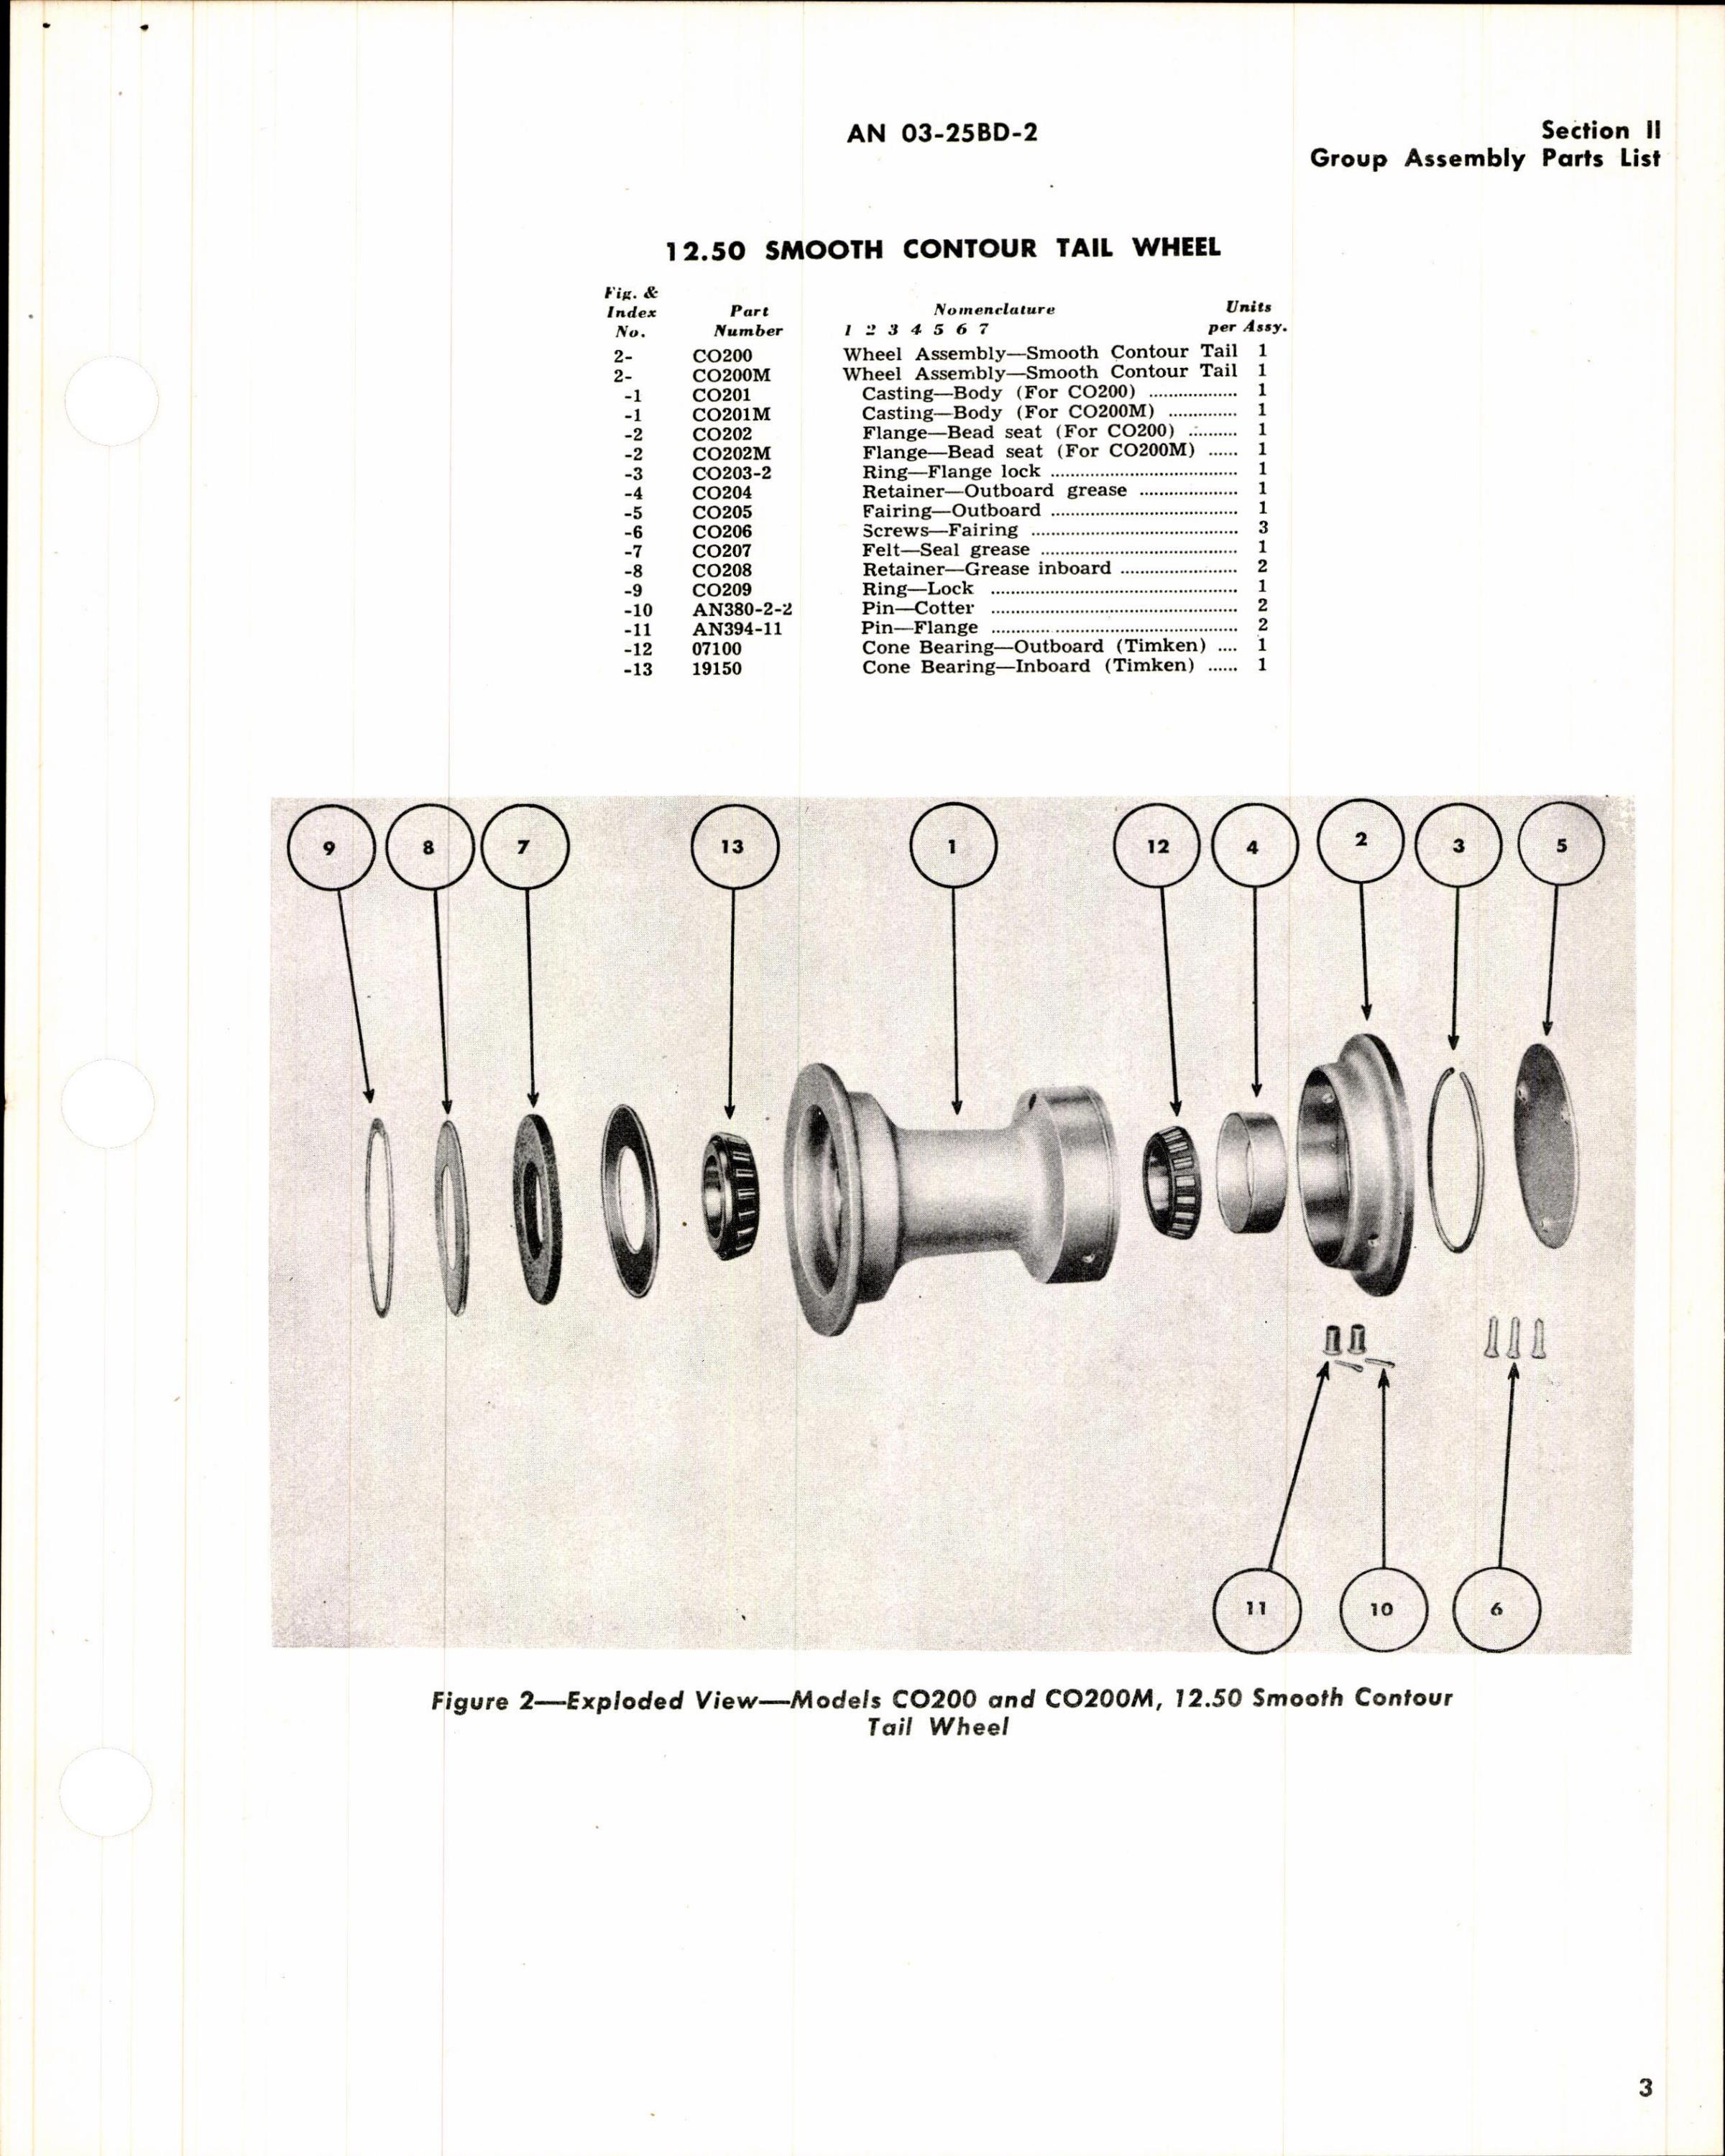 Sample page 5 from AirCorps Library document: Parts Catalog for Firestone Tail Wheels